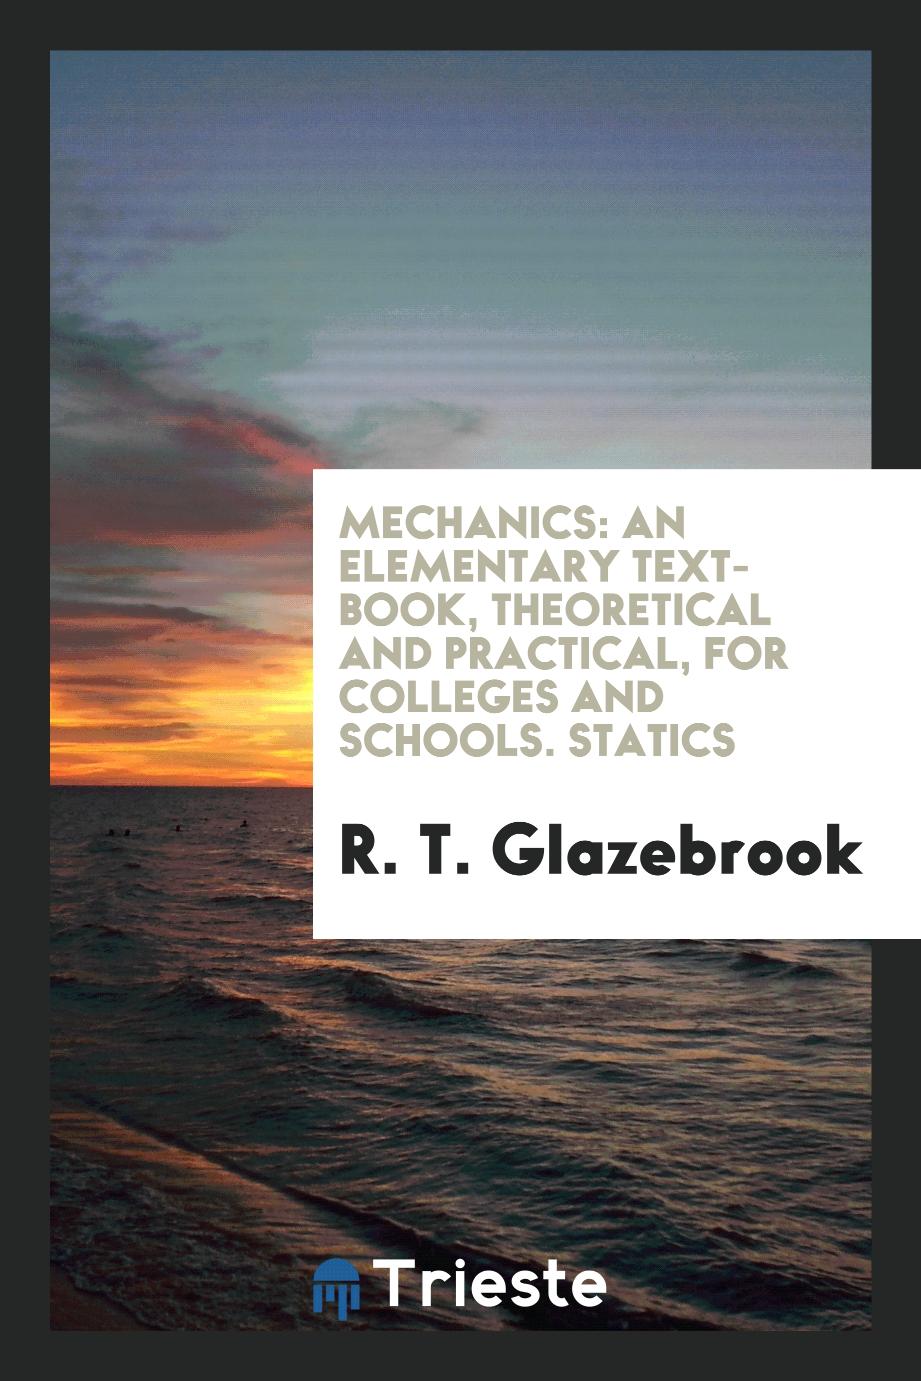 Mechanics: An Elementary Text-Book, Theoretical and Practical, for Colleges and Schools. Statics